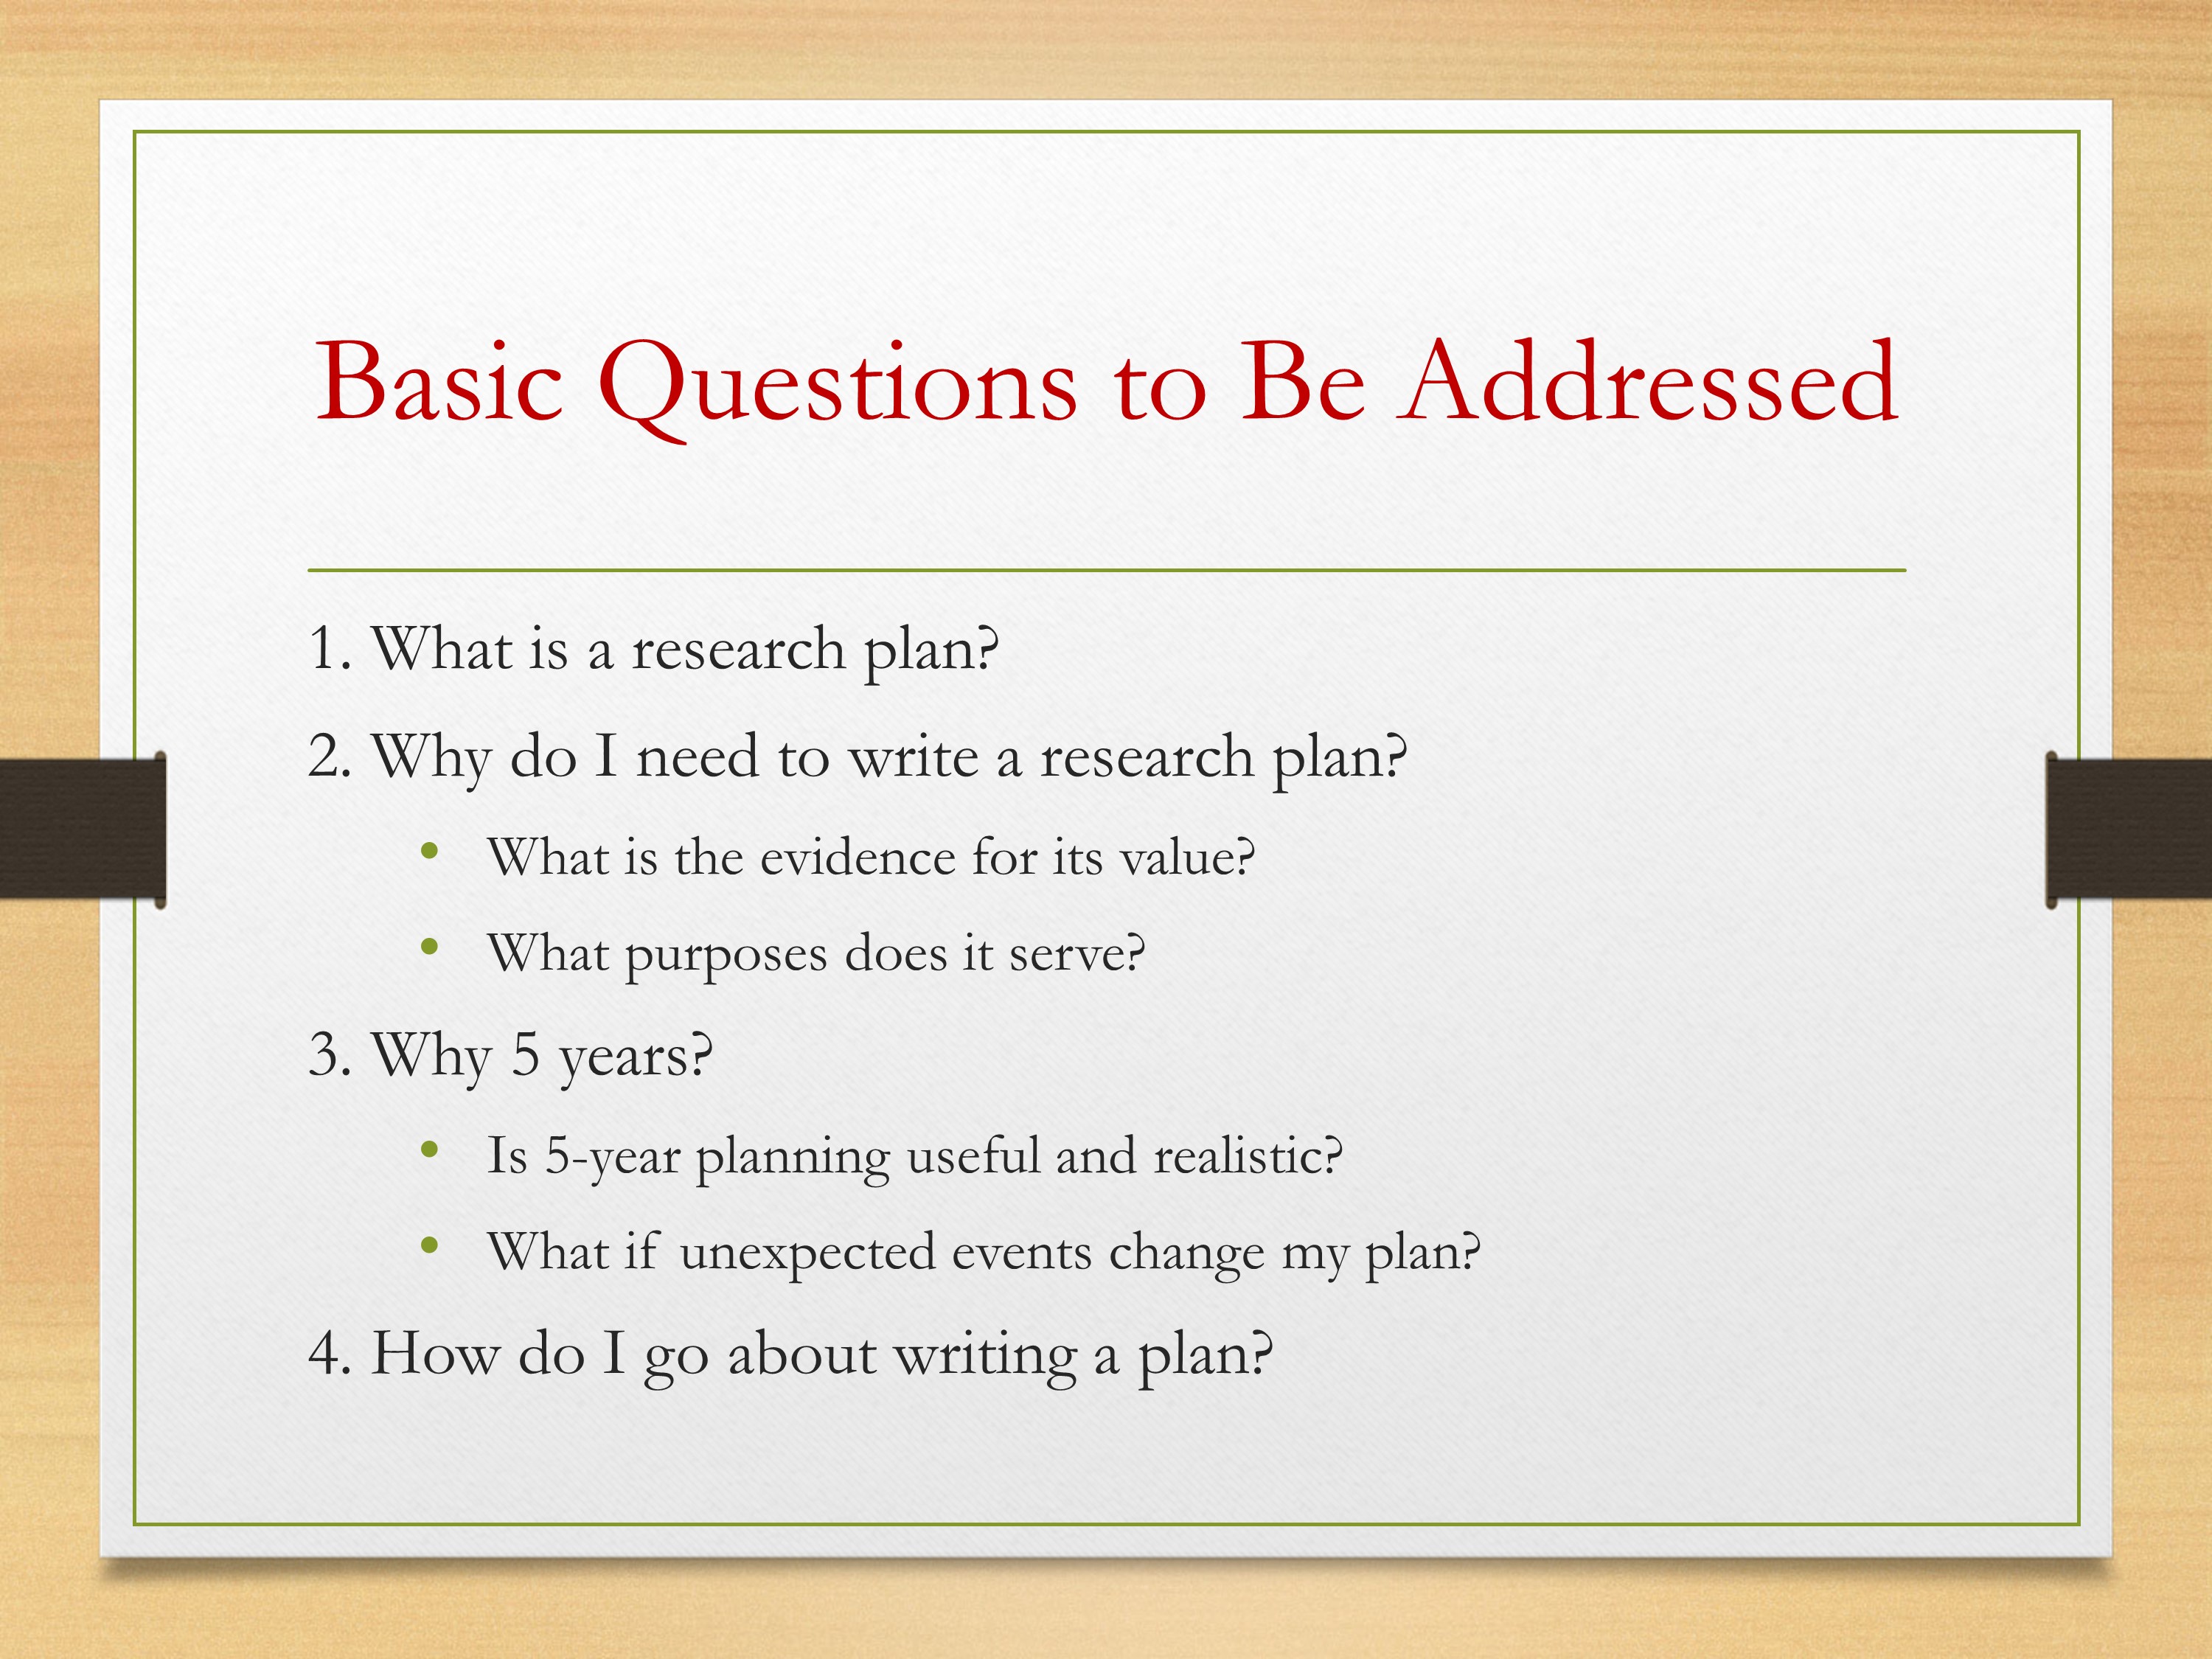 Developing a Five-Year Research Plan - ASHA Journals Academy